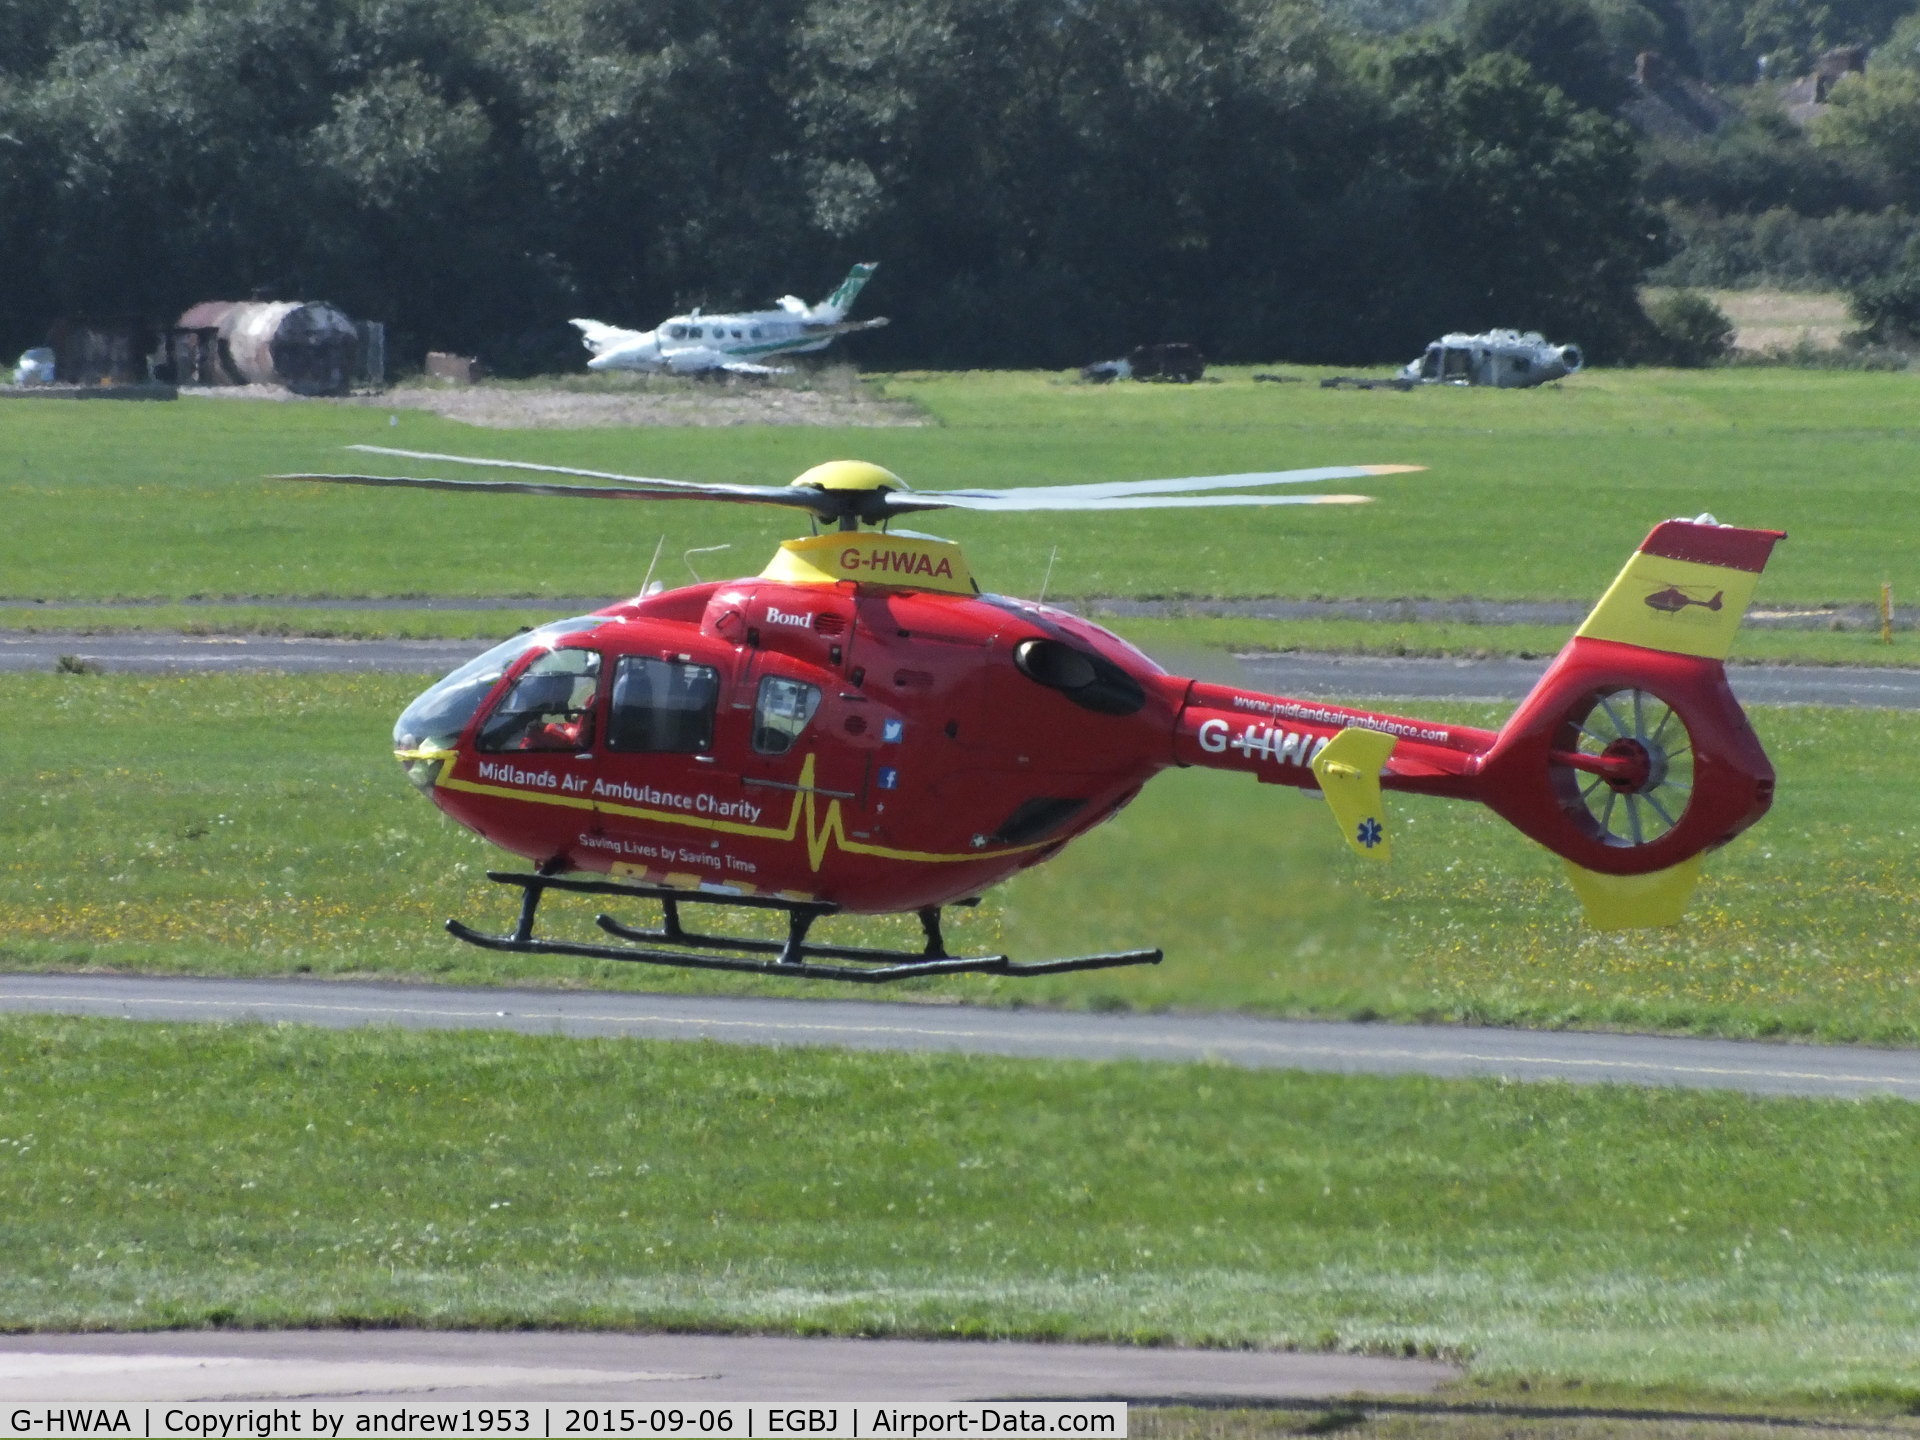 G-HWAA, 2005 Eurocopter EC-135T-2 C/N 0375, G-HWAA at Gloucestershire Airport.